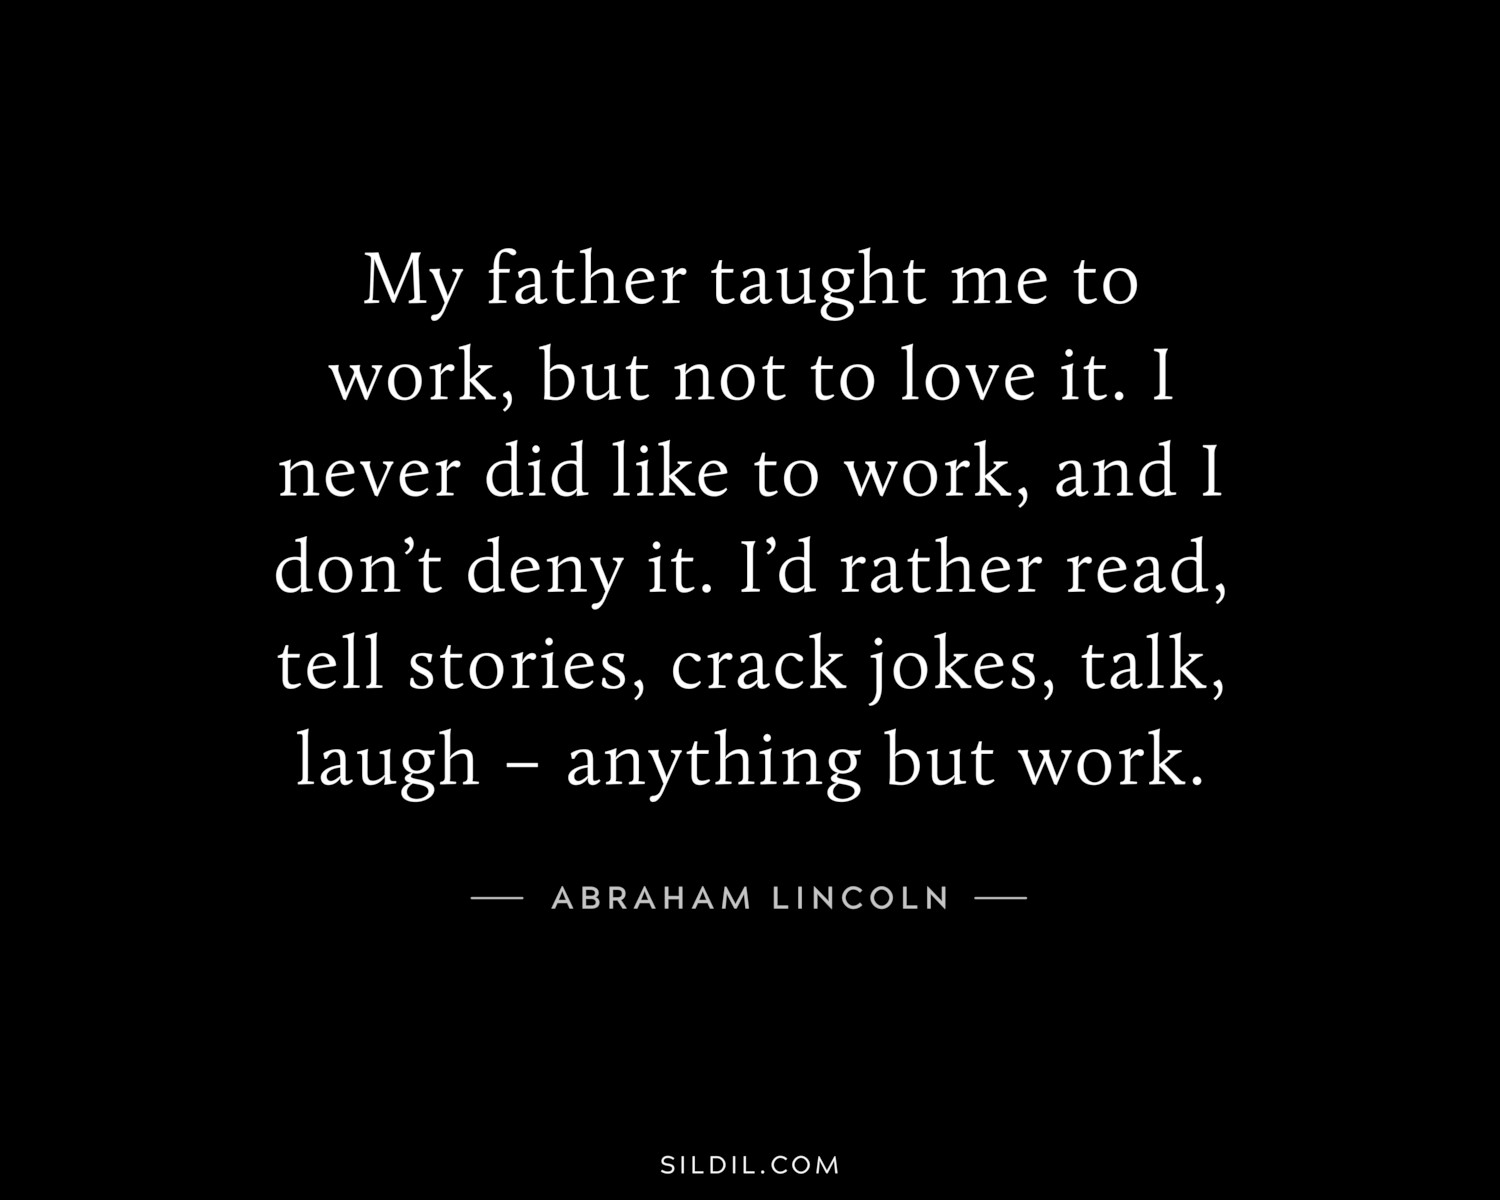 My father taught me to work, but not to love it. I never did like to work, and I don’t deny it. I’d rather read, tell stories, crack jokes, talk, laugh – anything but work.